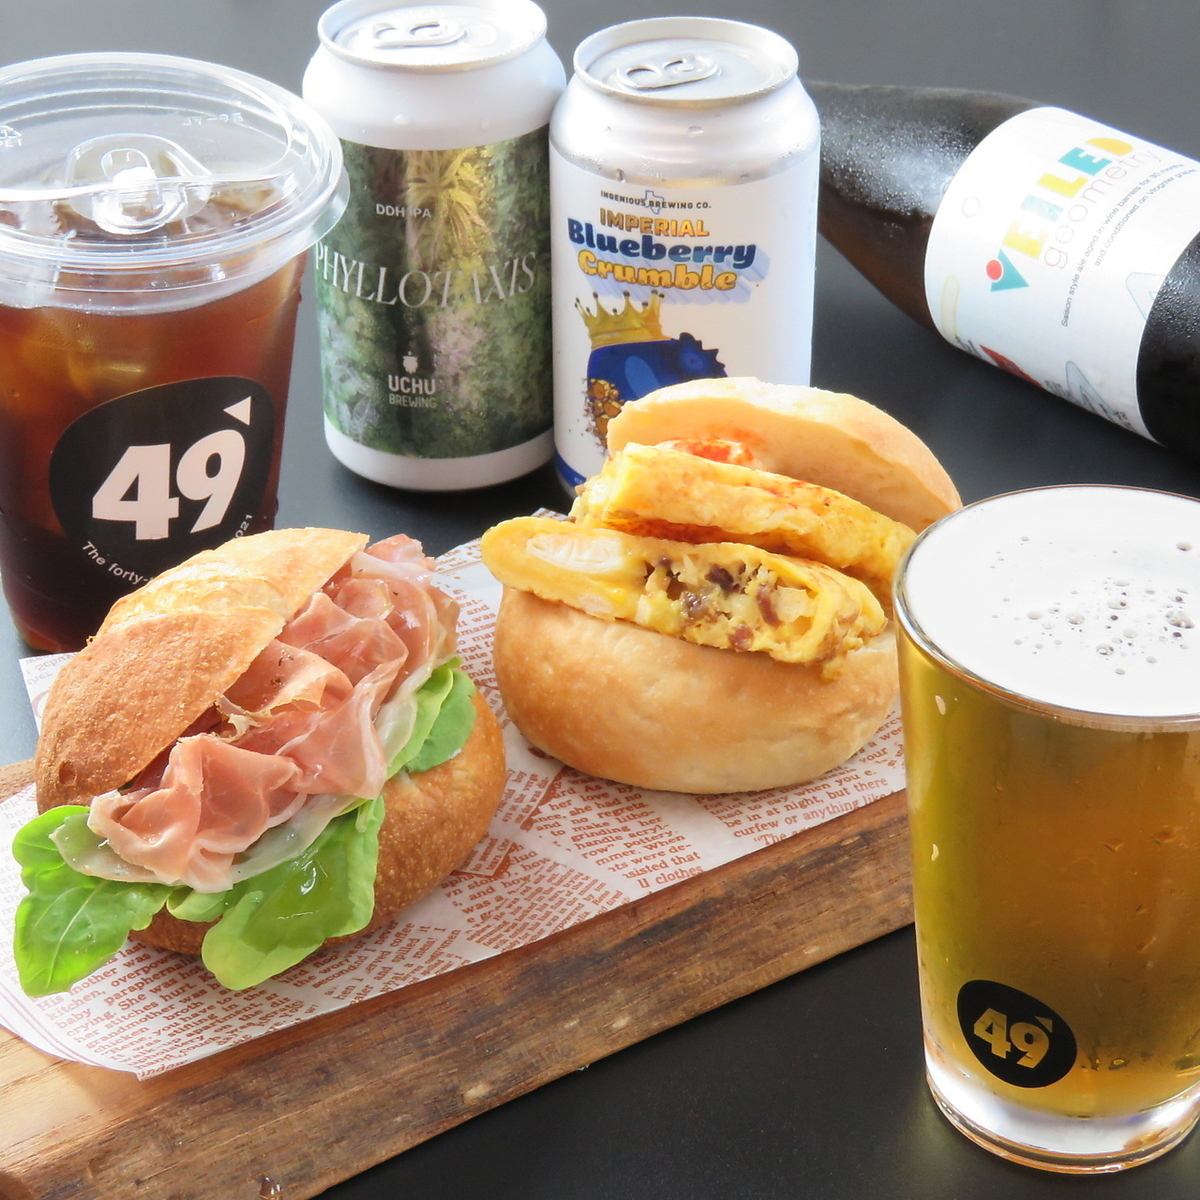 A sports cafe bar where you can have original burgers for lunch and craft beer for dinner!